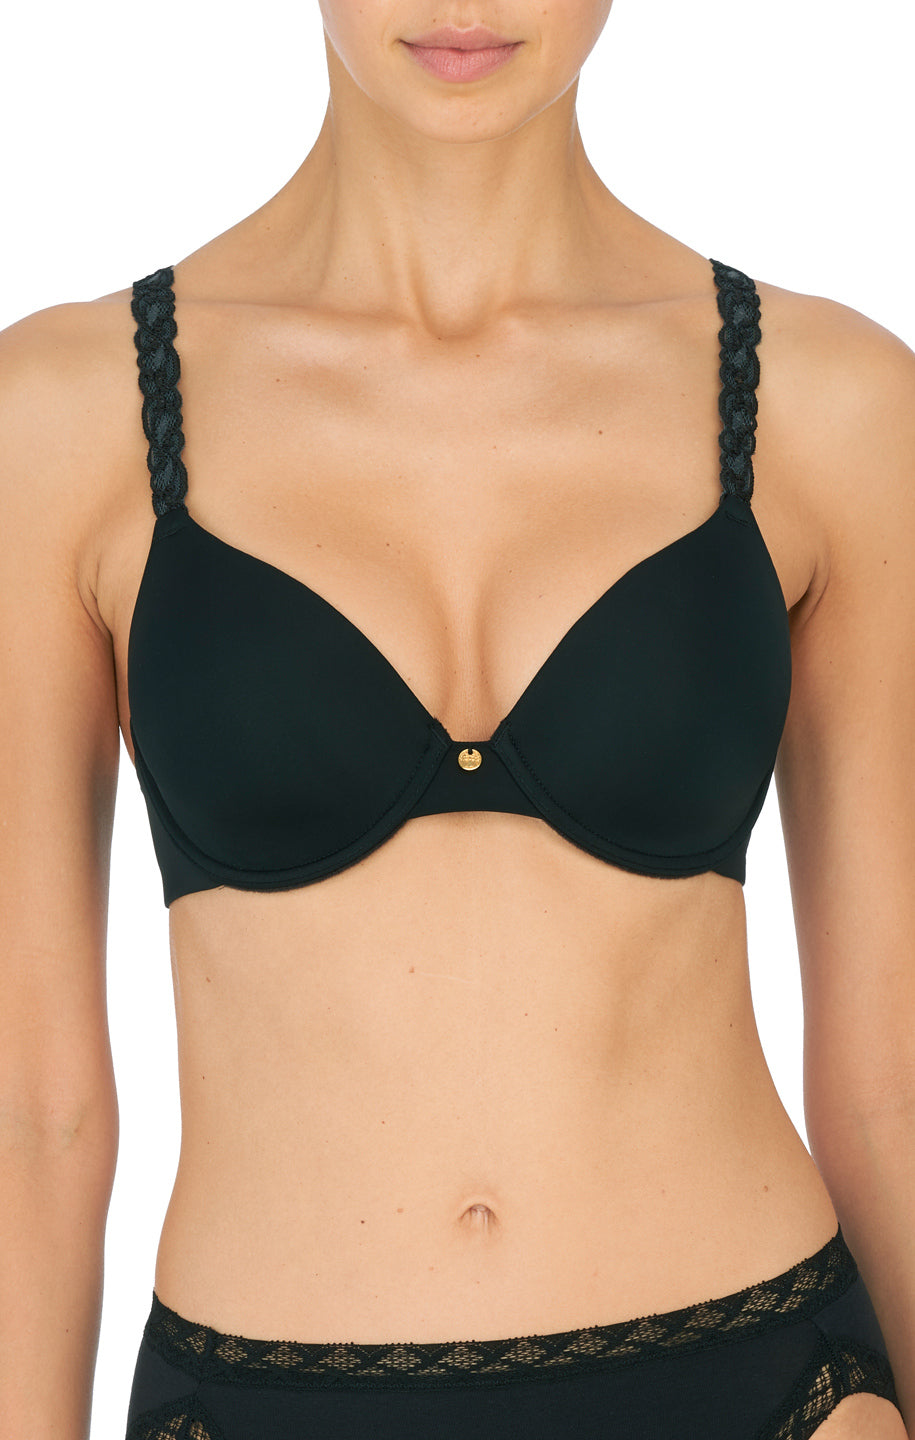 Pure Luxe Full Fit T-Shirt Bra